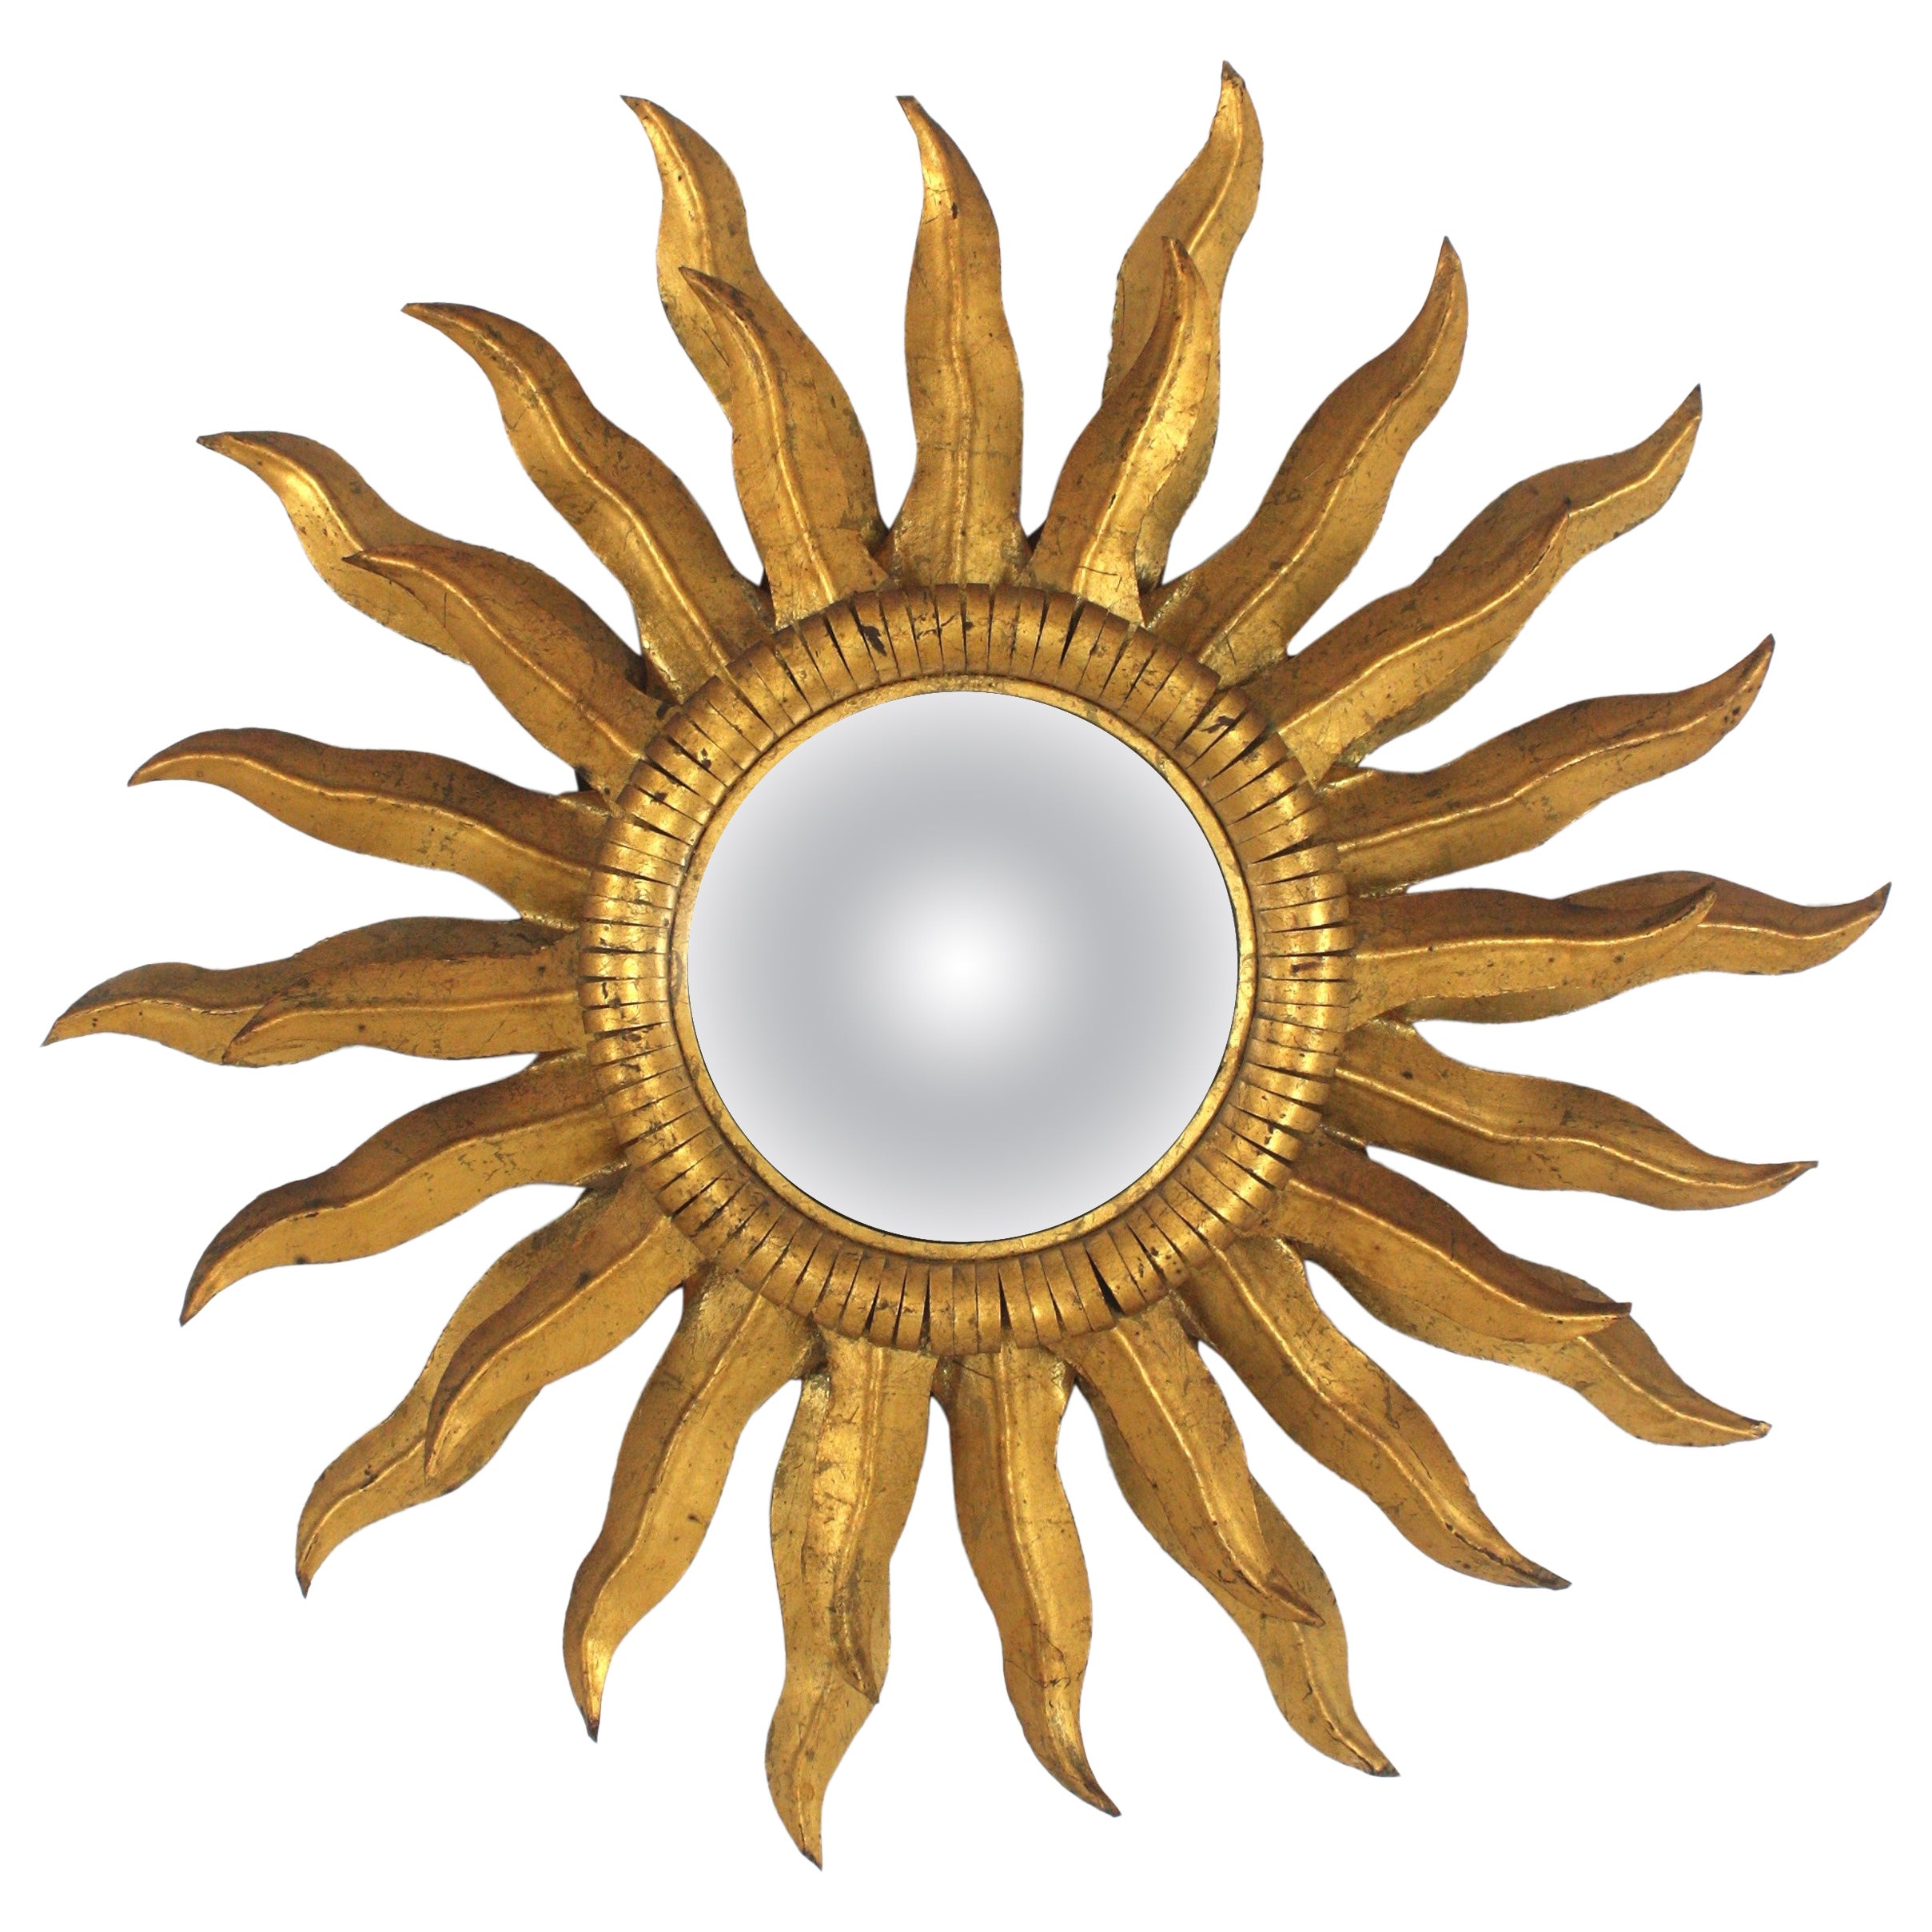 Spanish Double Layered Convex Sunburst Mirror in Gilt Metal, 1950s For Sale